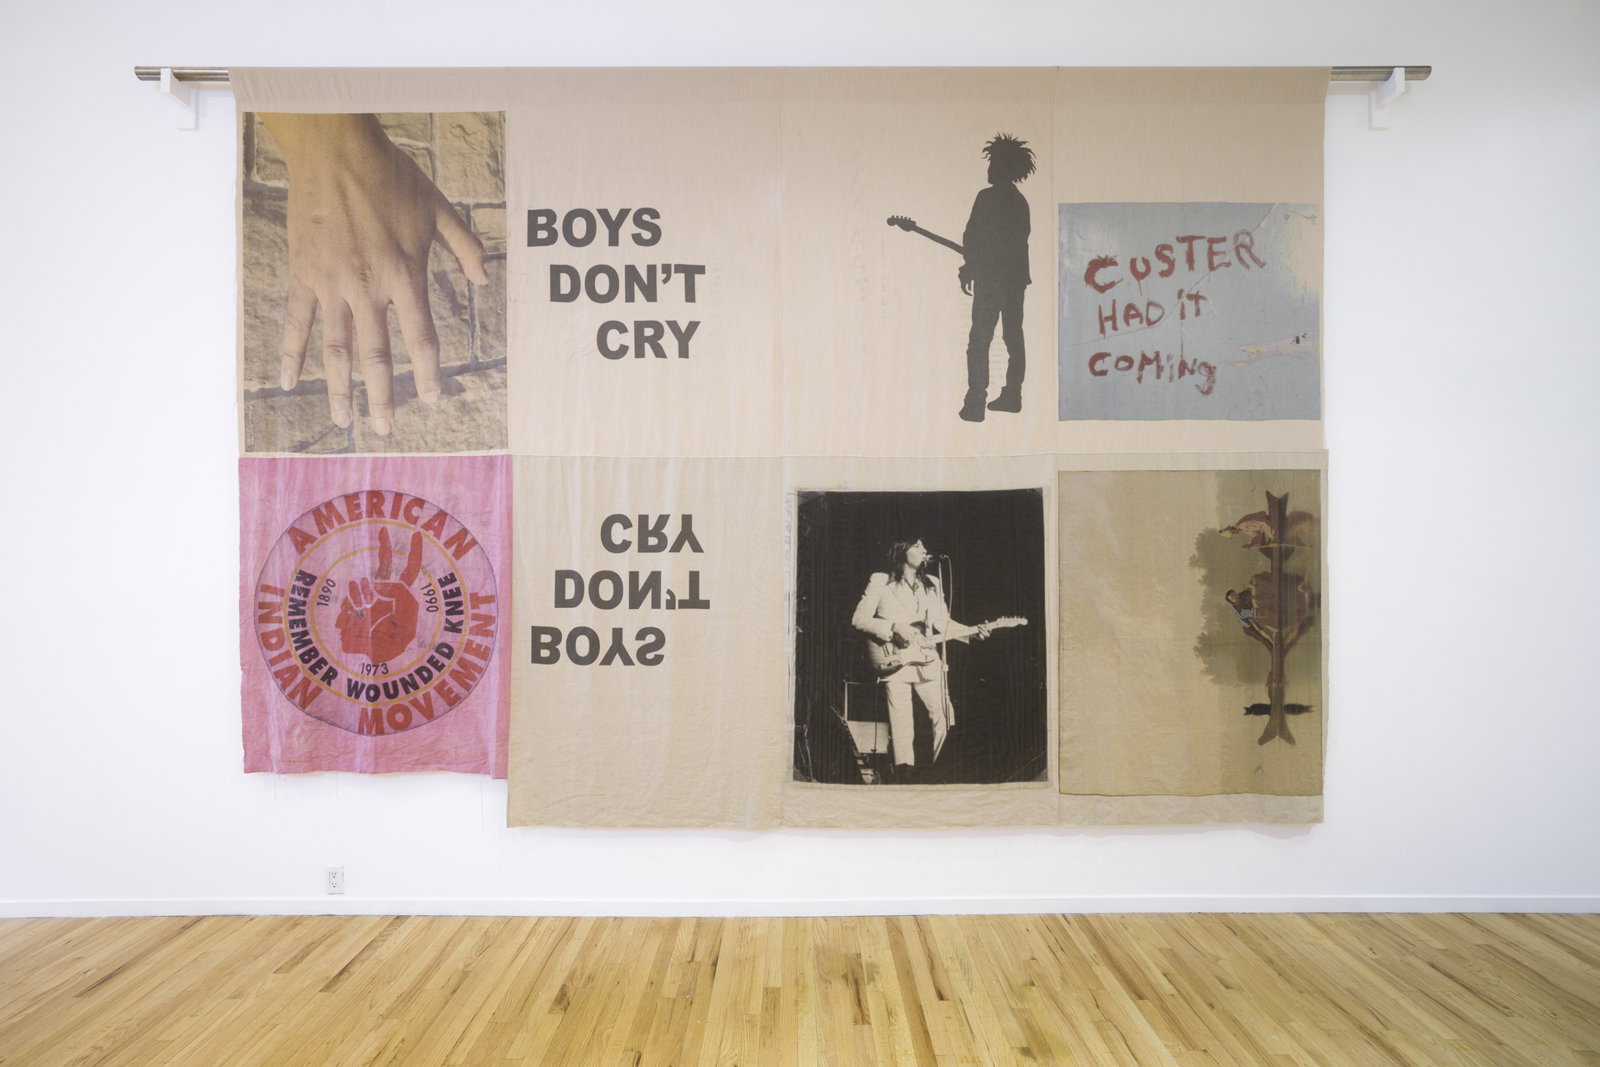 Duane Linklater, boys don’t cry, 2017, digital print on hand dyed linen, 120 x 180 in. (305 x 457 cm)